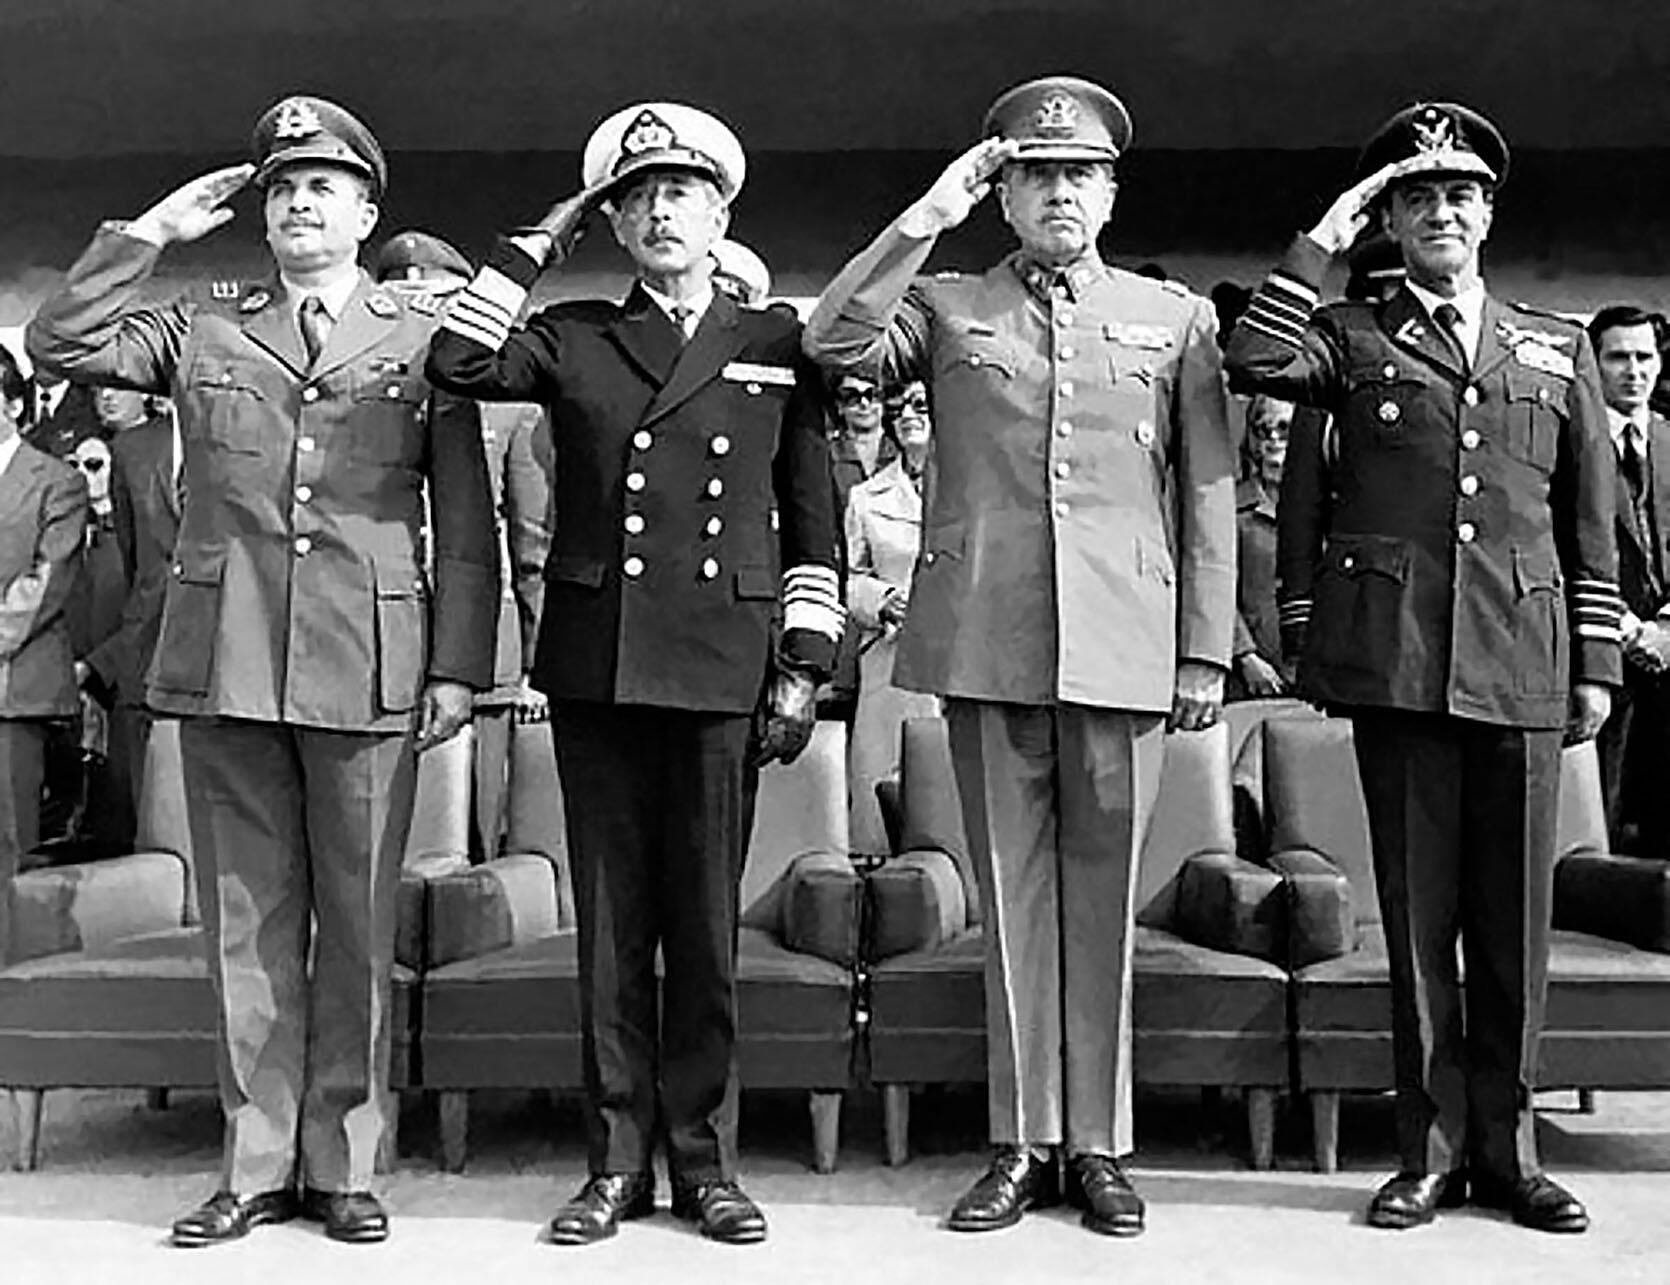 The four leaders of the September 1973 coup in Chile pose while saluting. (Photo from Wikimedia Commons.)